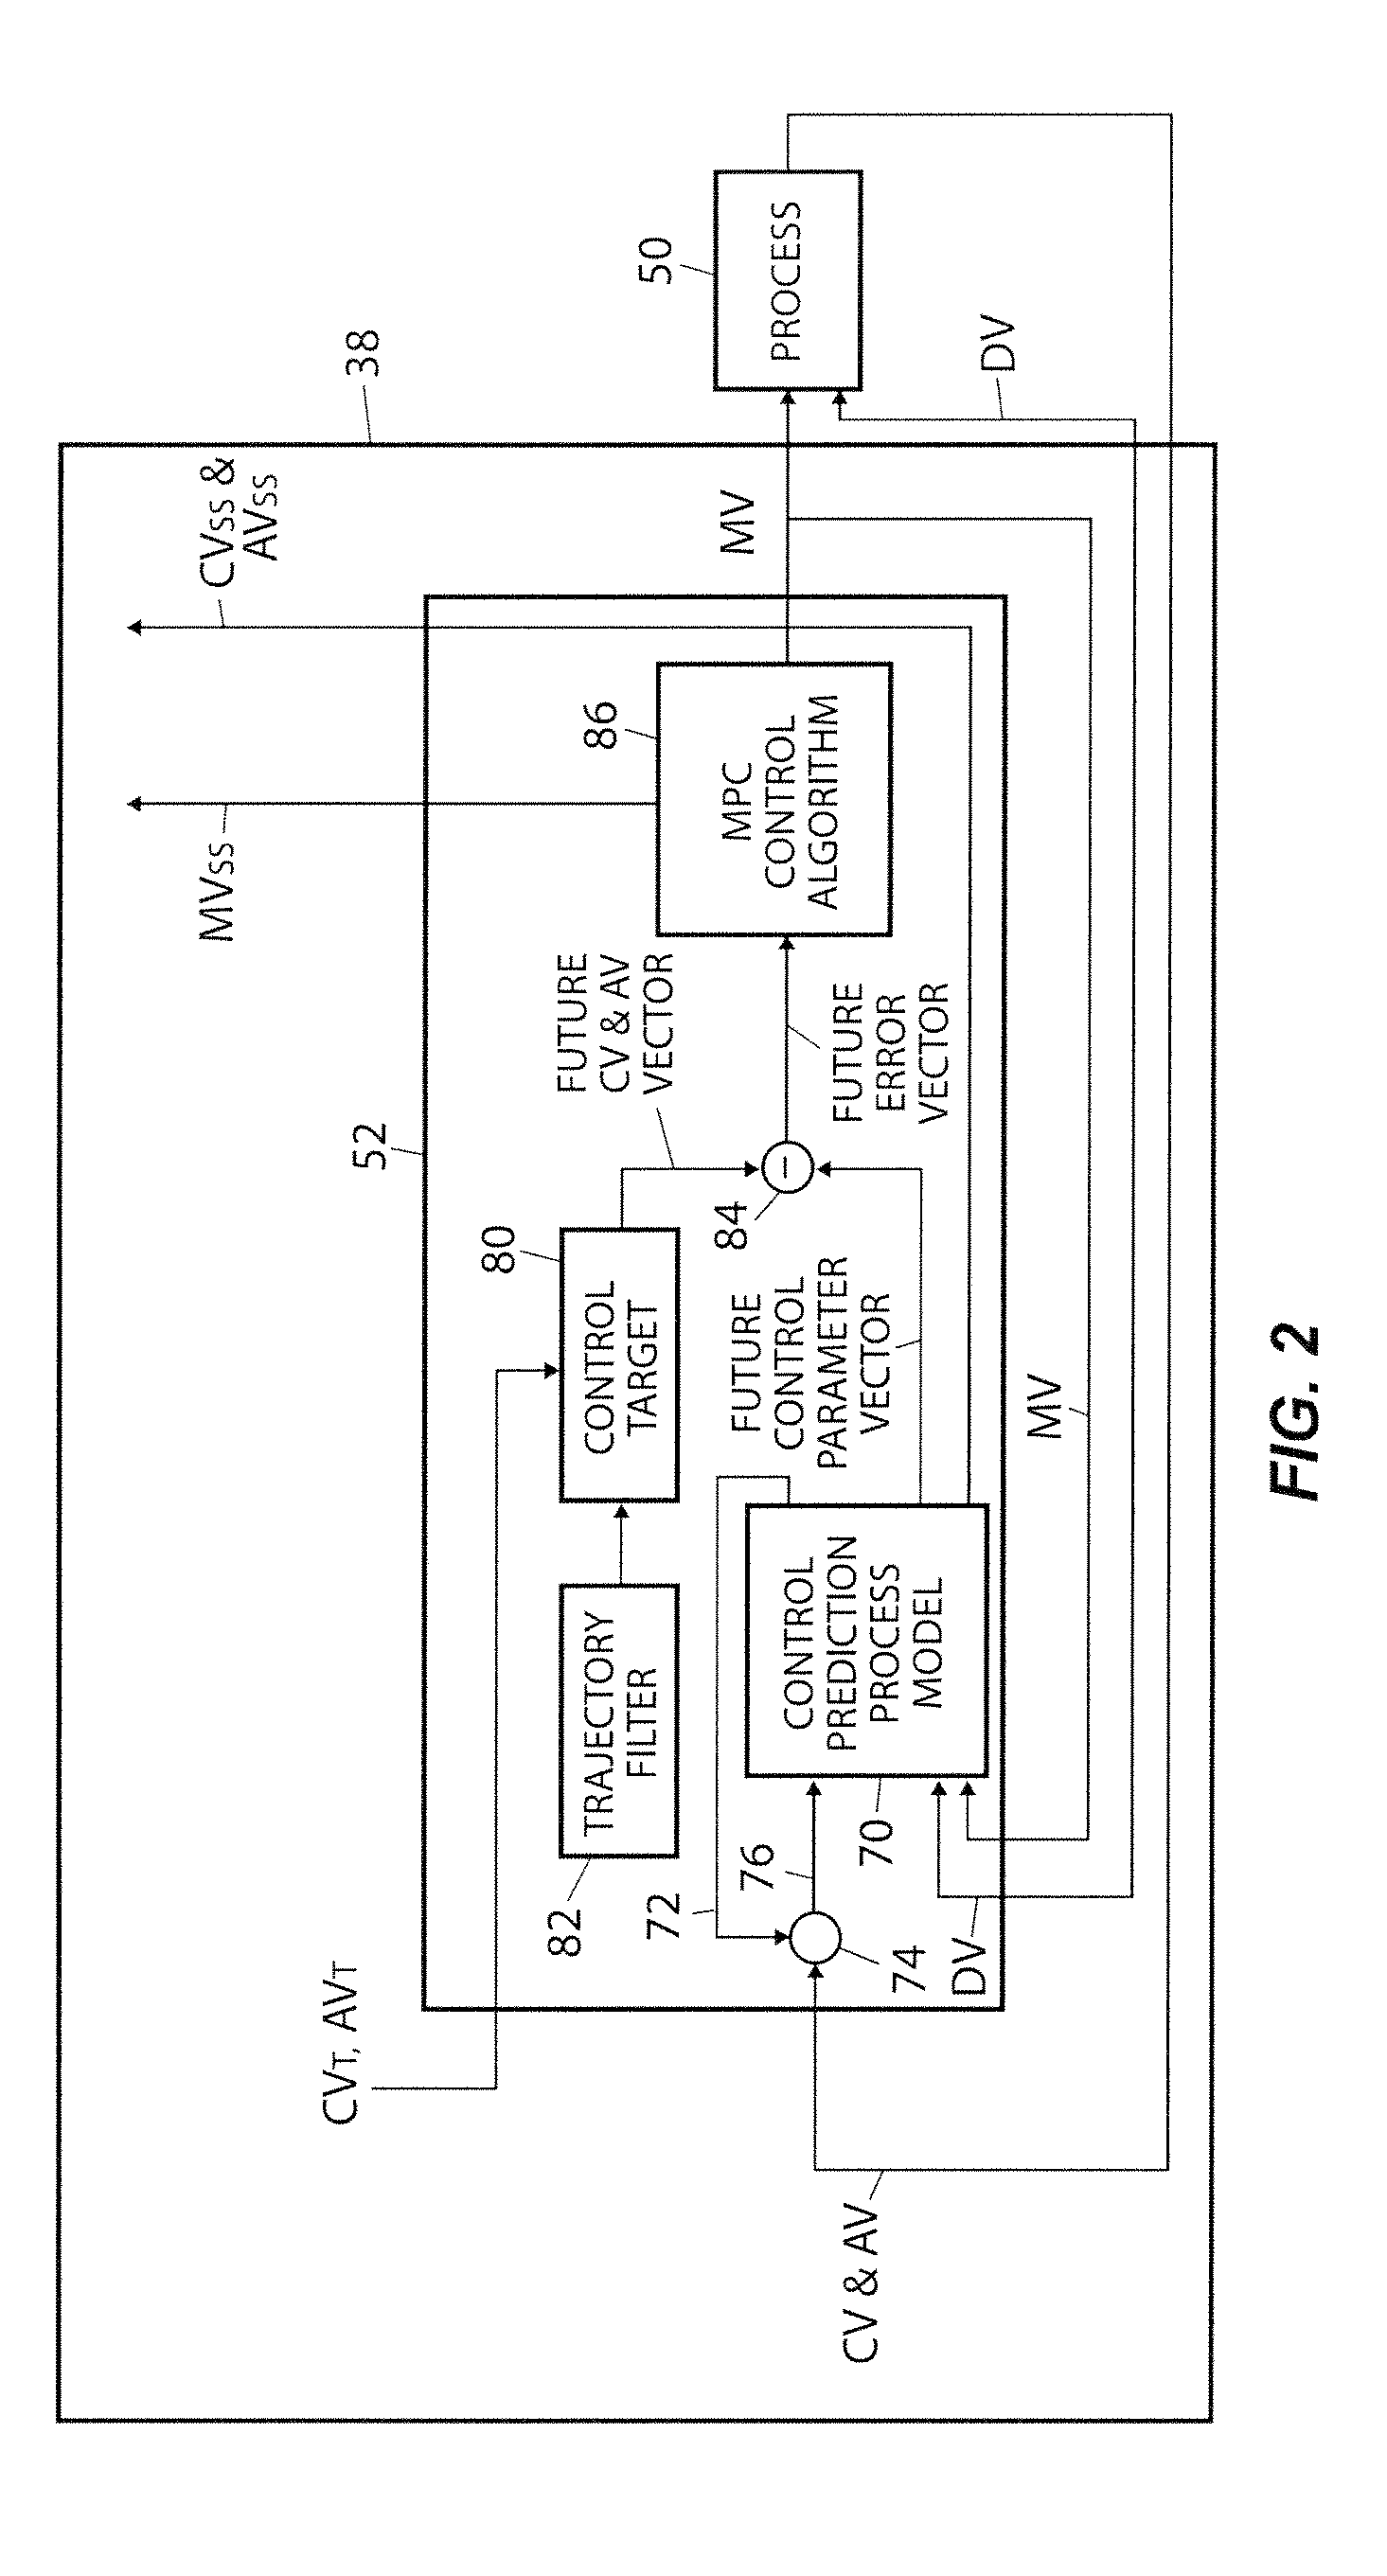 Robust adaptive model predictive controller with tuning to compensate for model mismatch